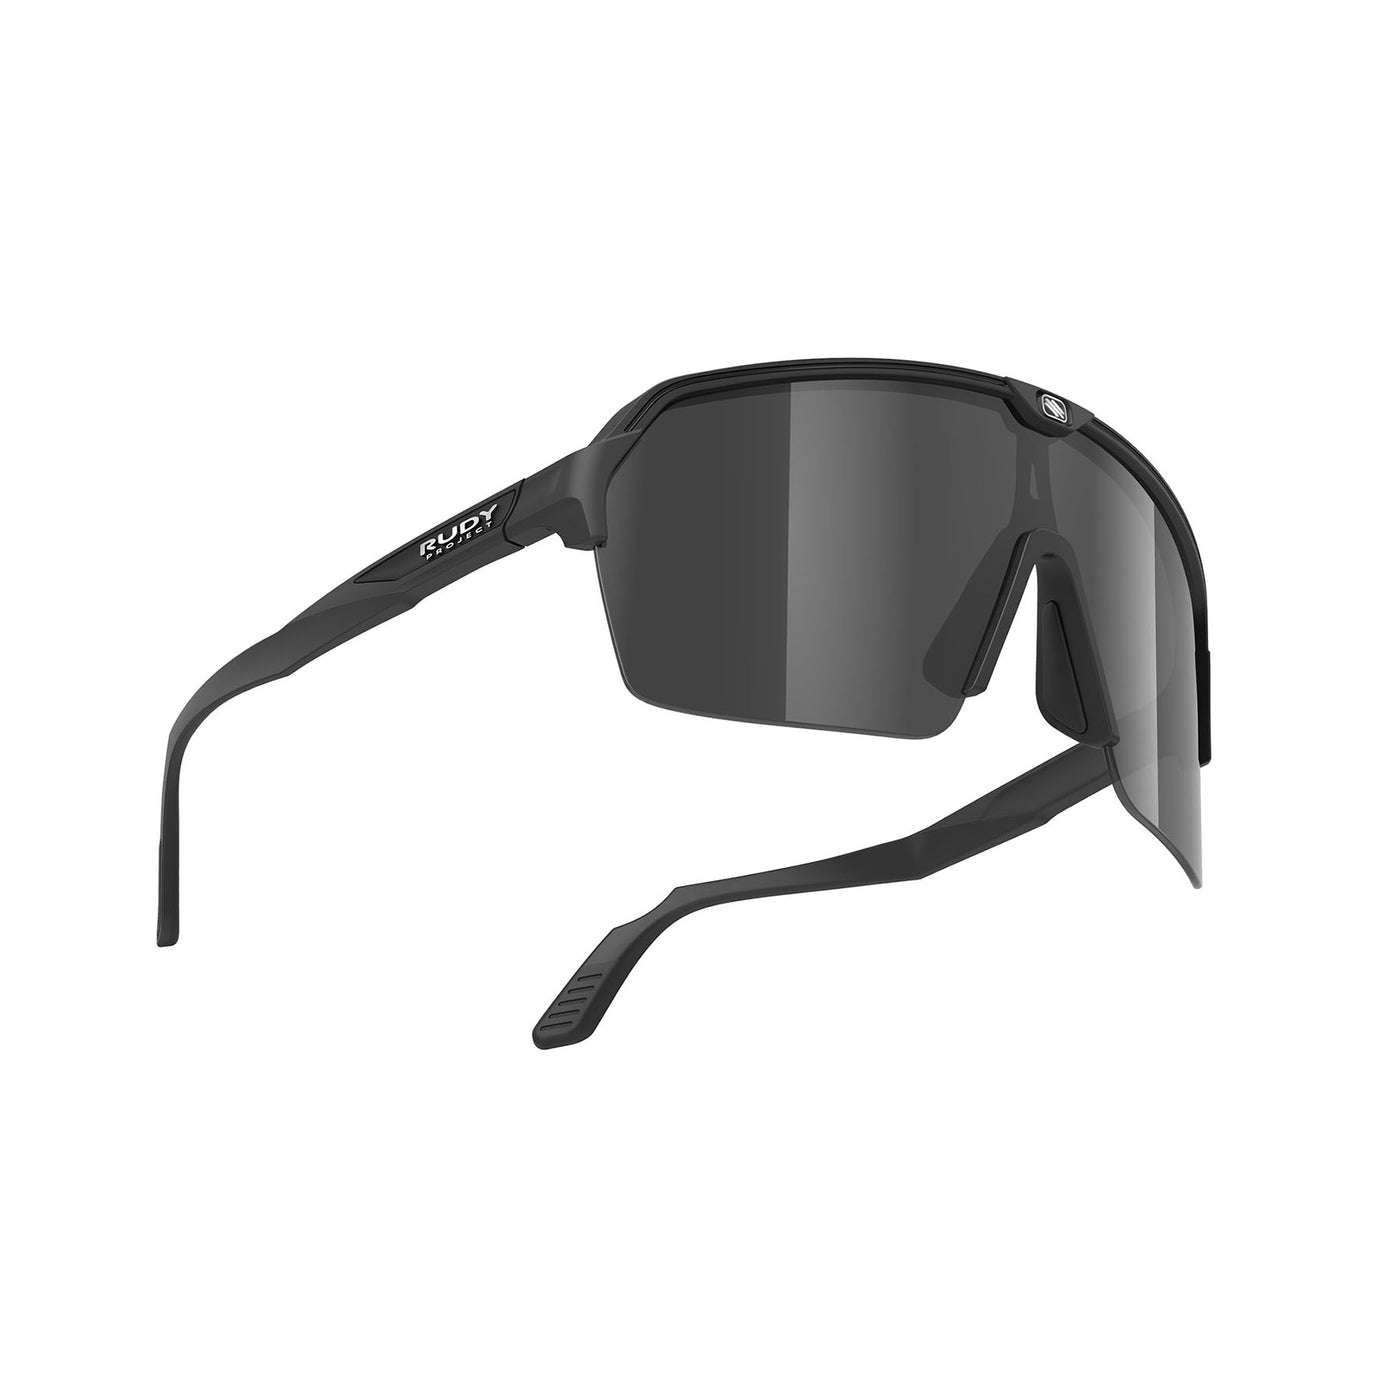 Rudy Project Spinshield Air running and cycling sport shield sunglasses#color_spinshield-air-black-matte-with-smoke-black-lenses